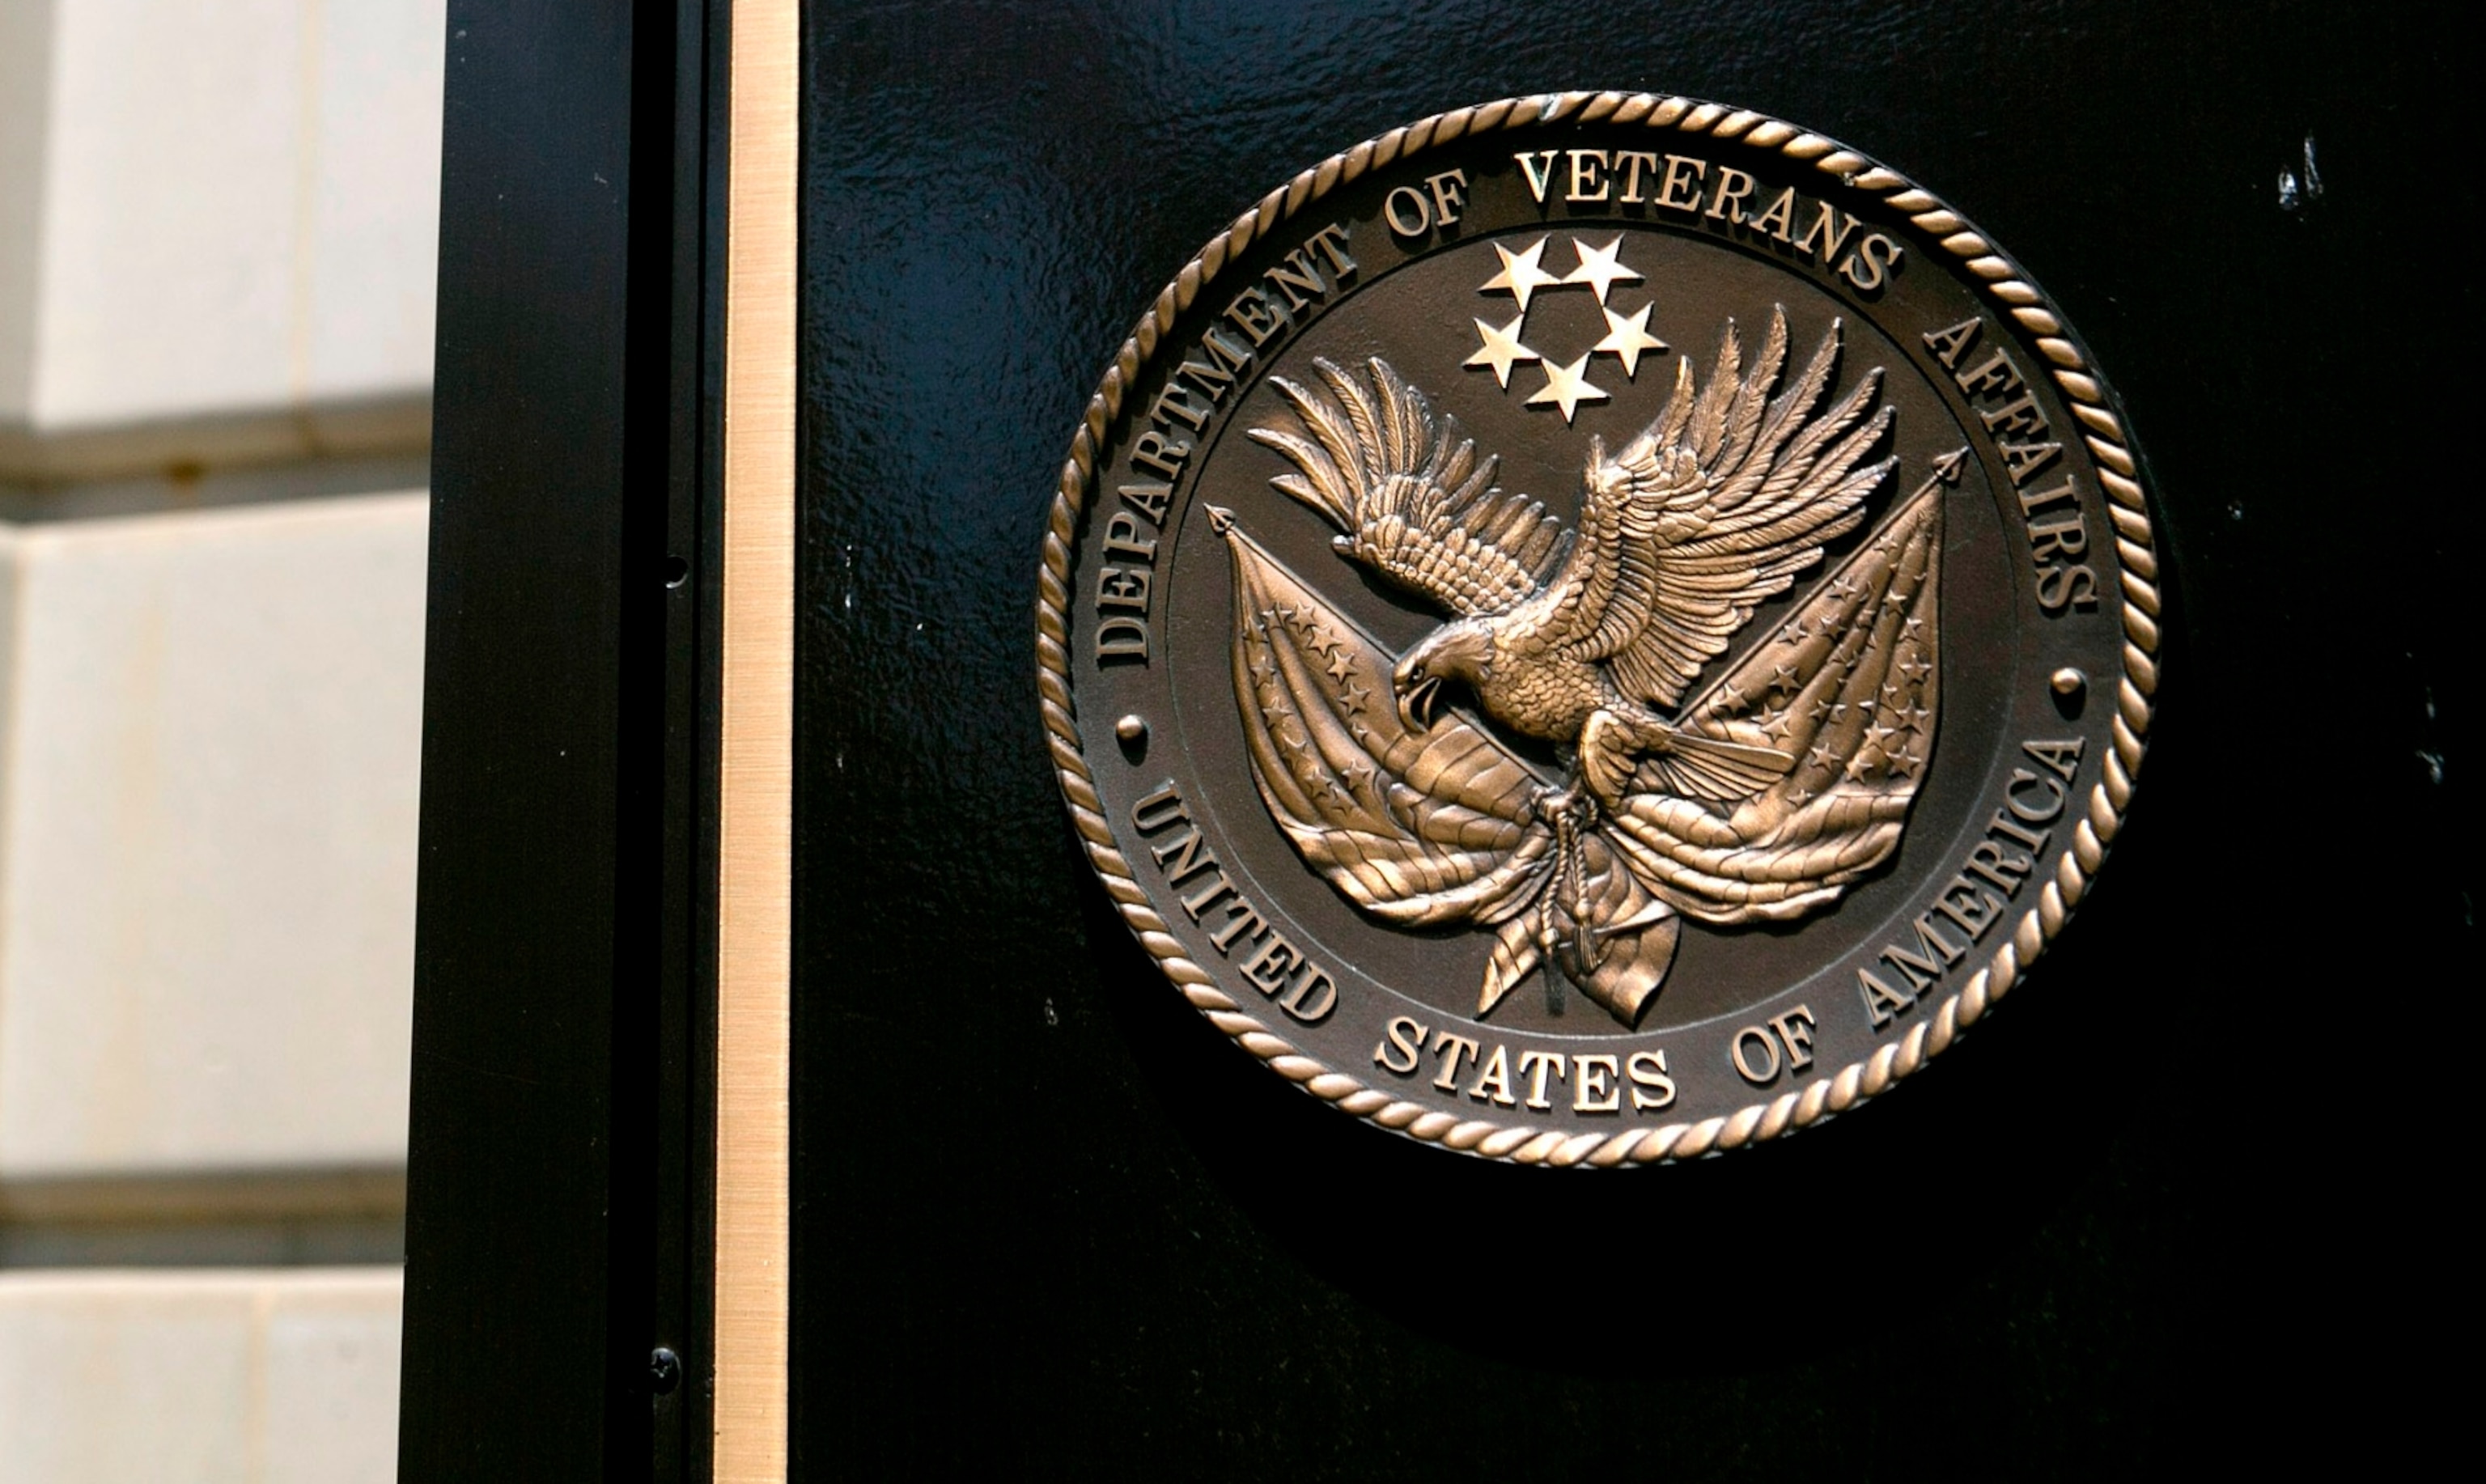 PHOTO: In this May 10, 2013, file photo, the U.S. Department of Veterans Affairs (VA) seal is shown at the headquarters in Washington, D.C.